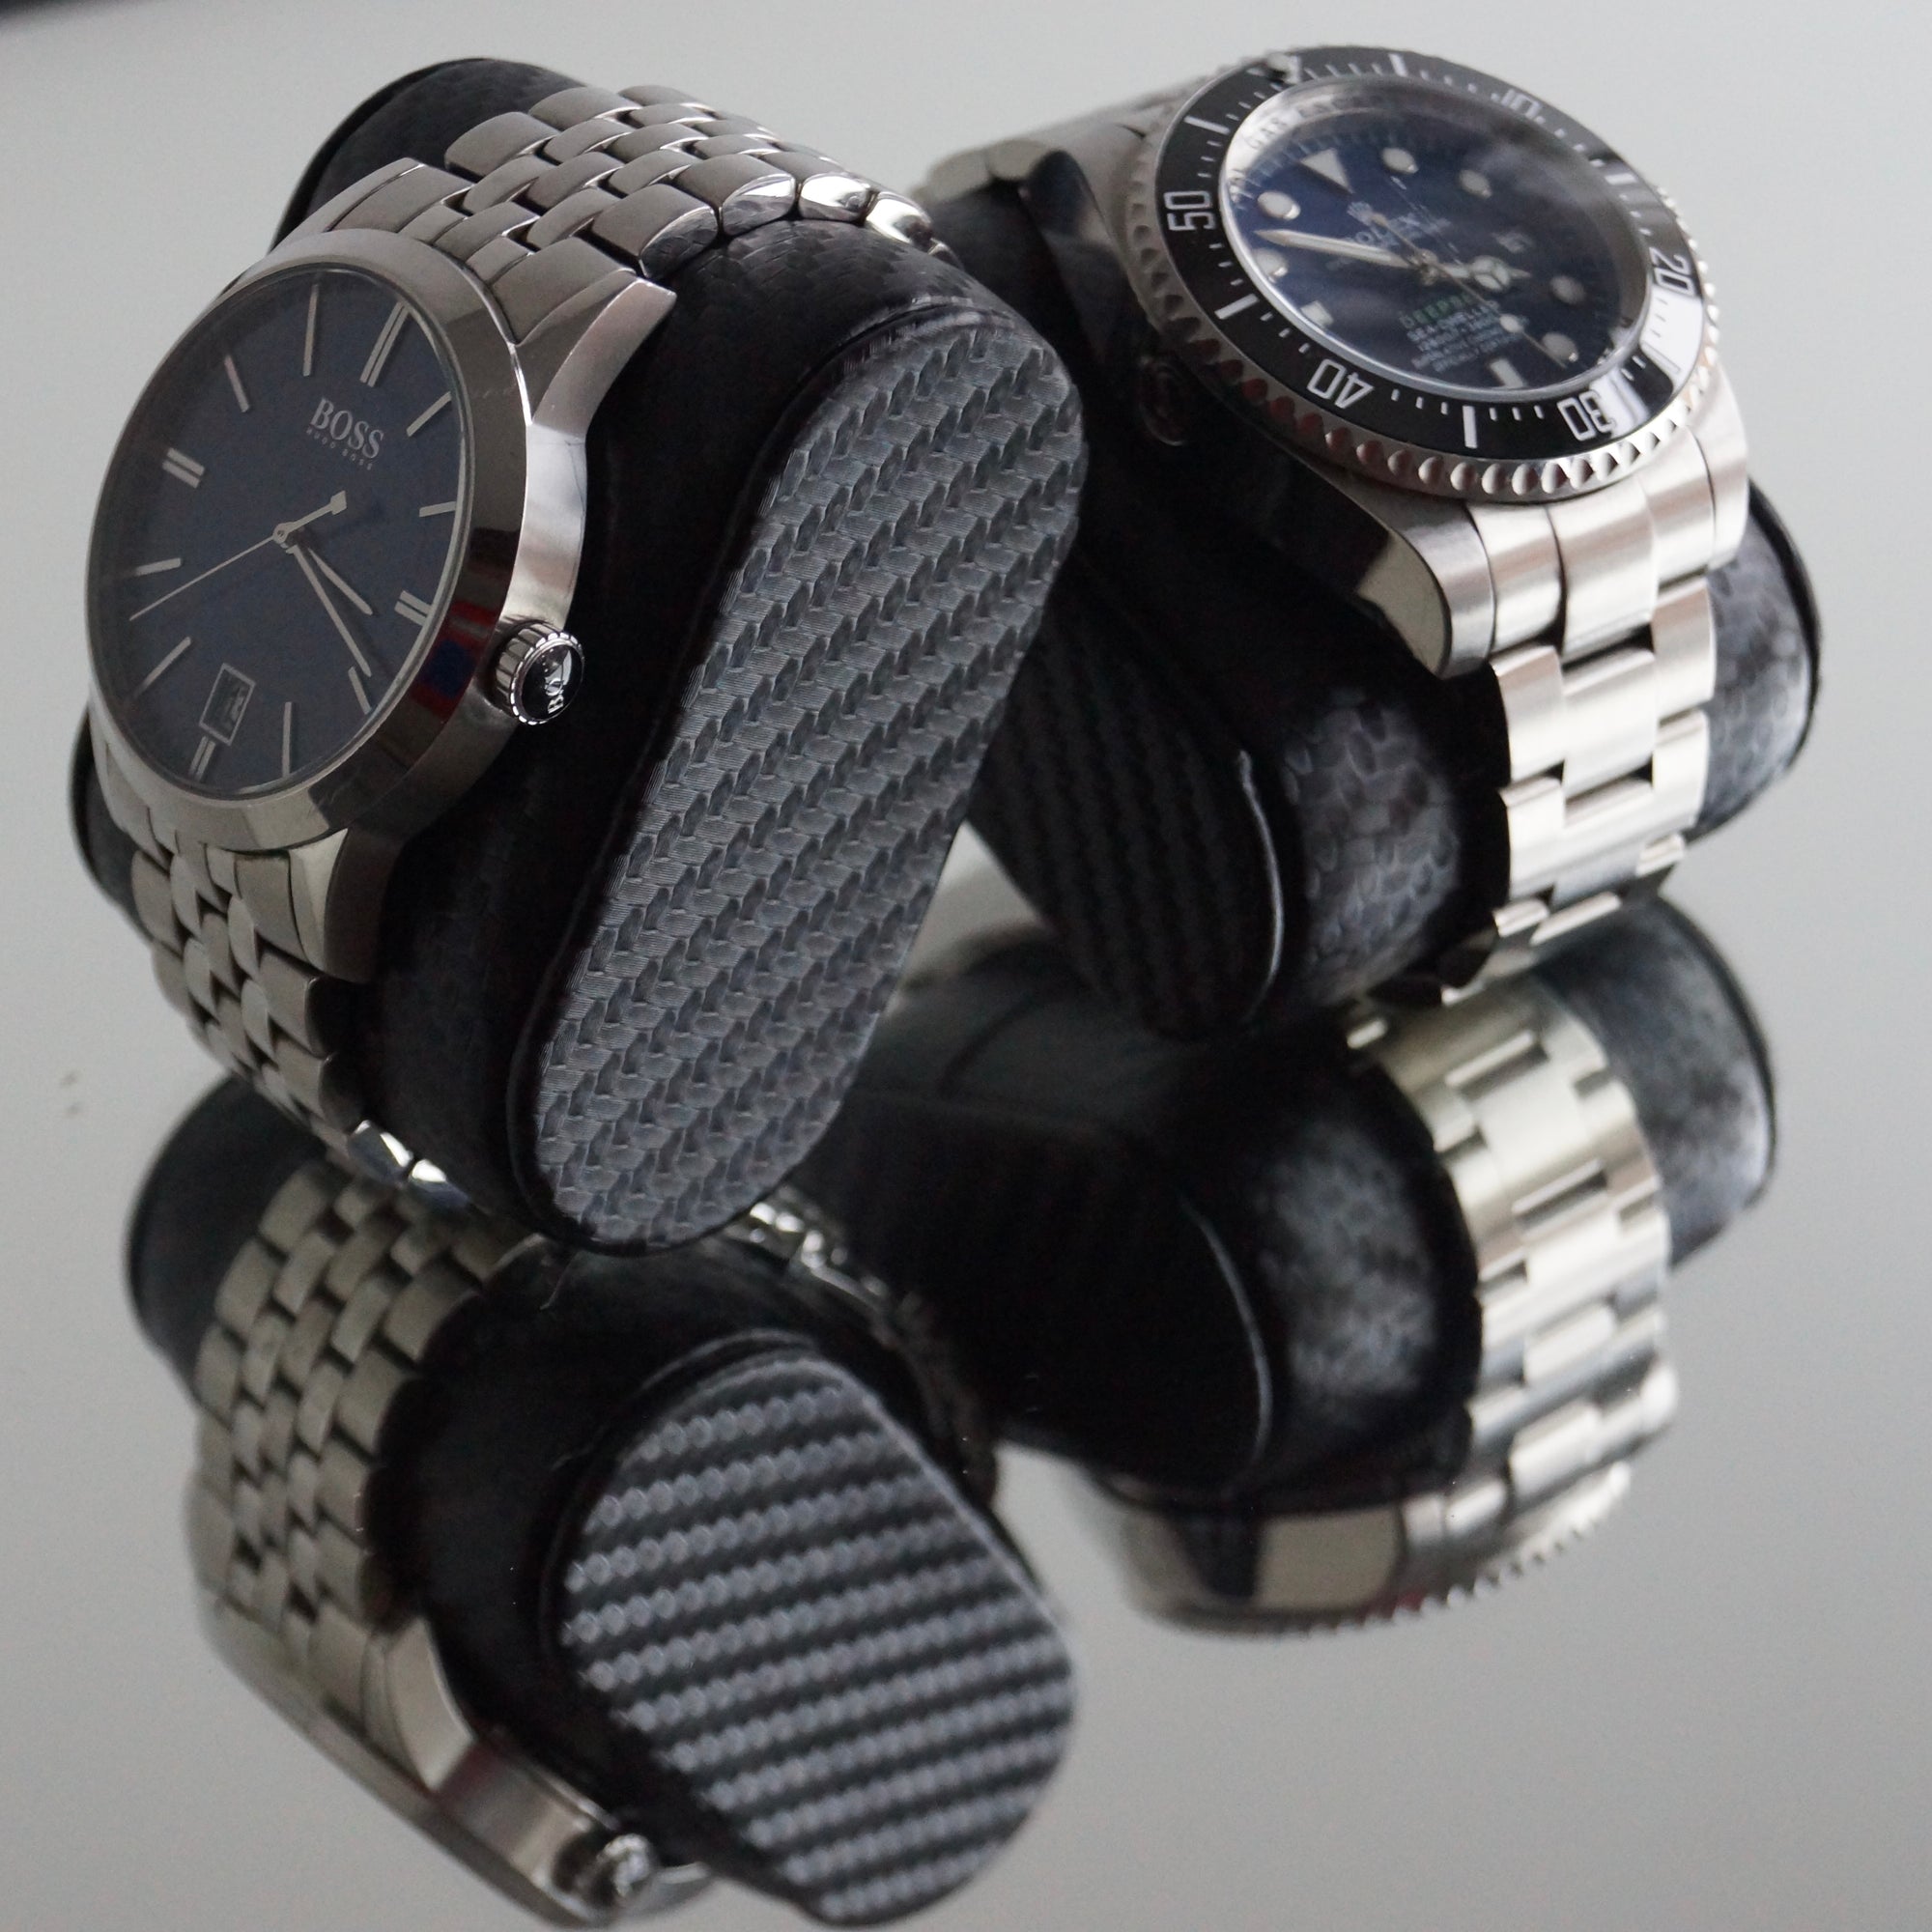 How to Store Watches When Not in Use